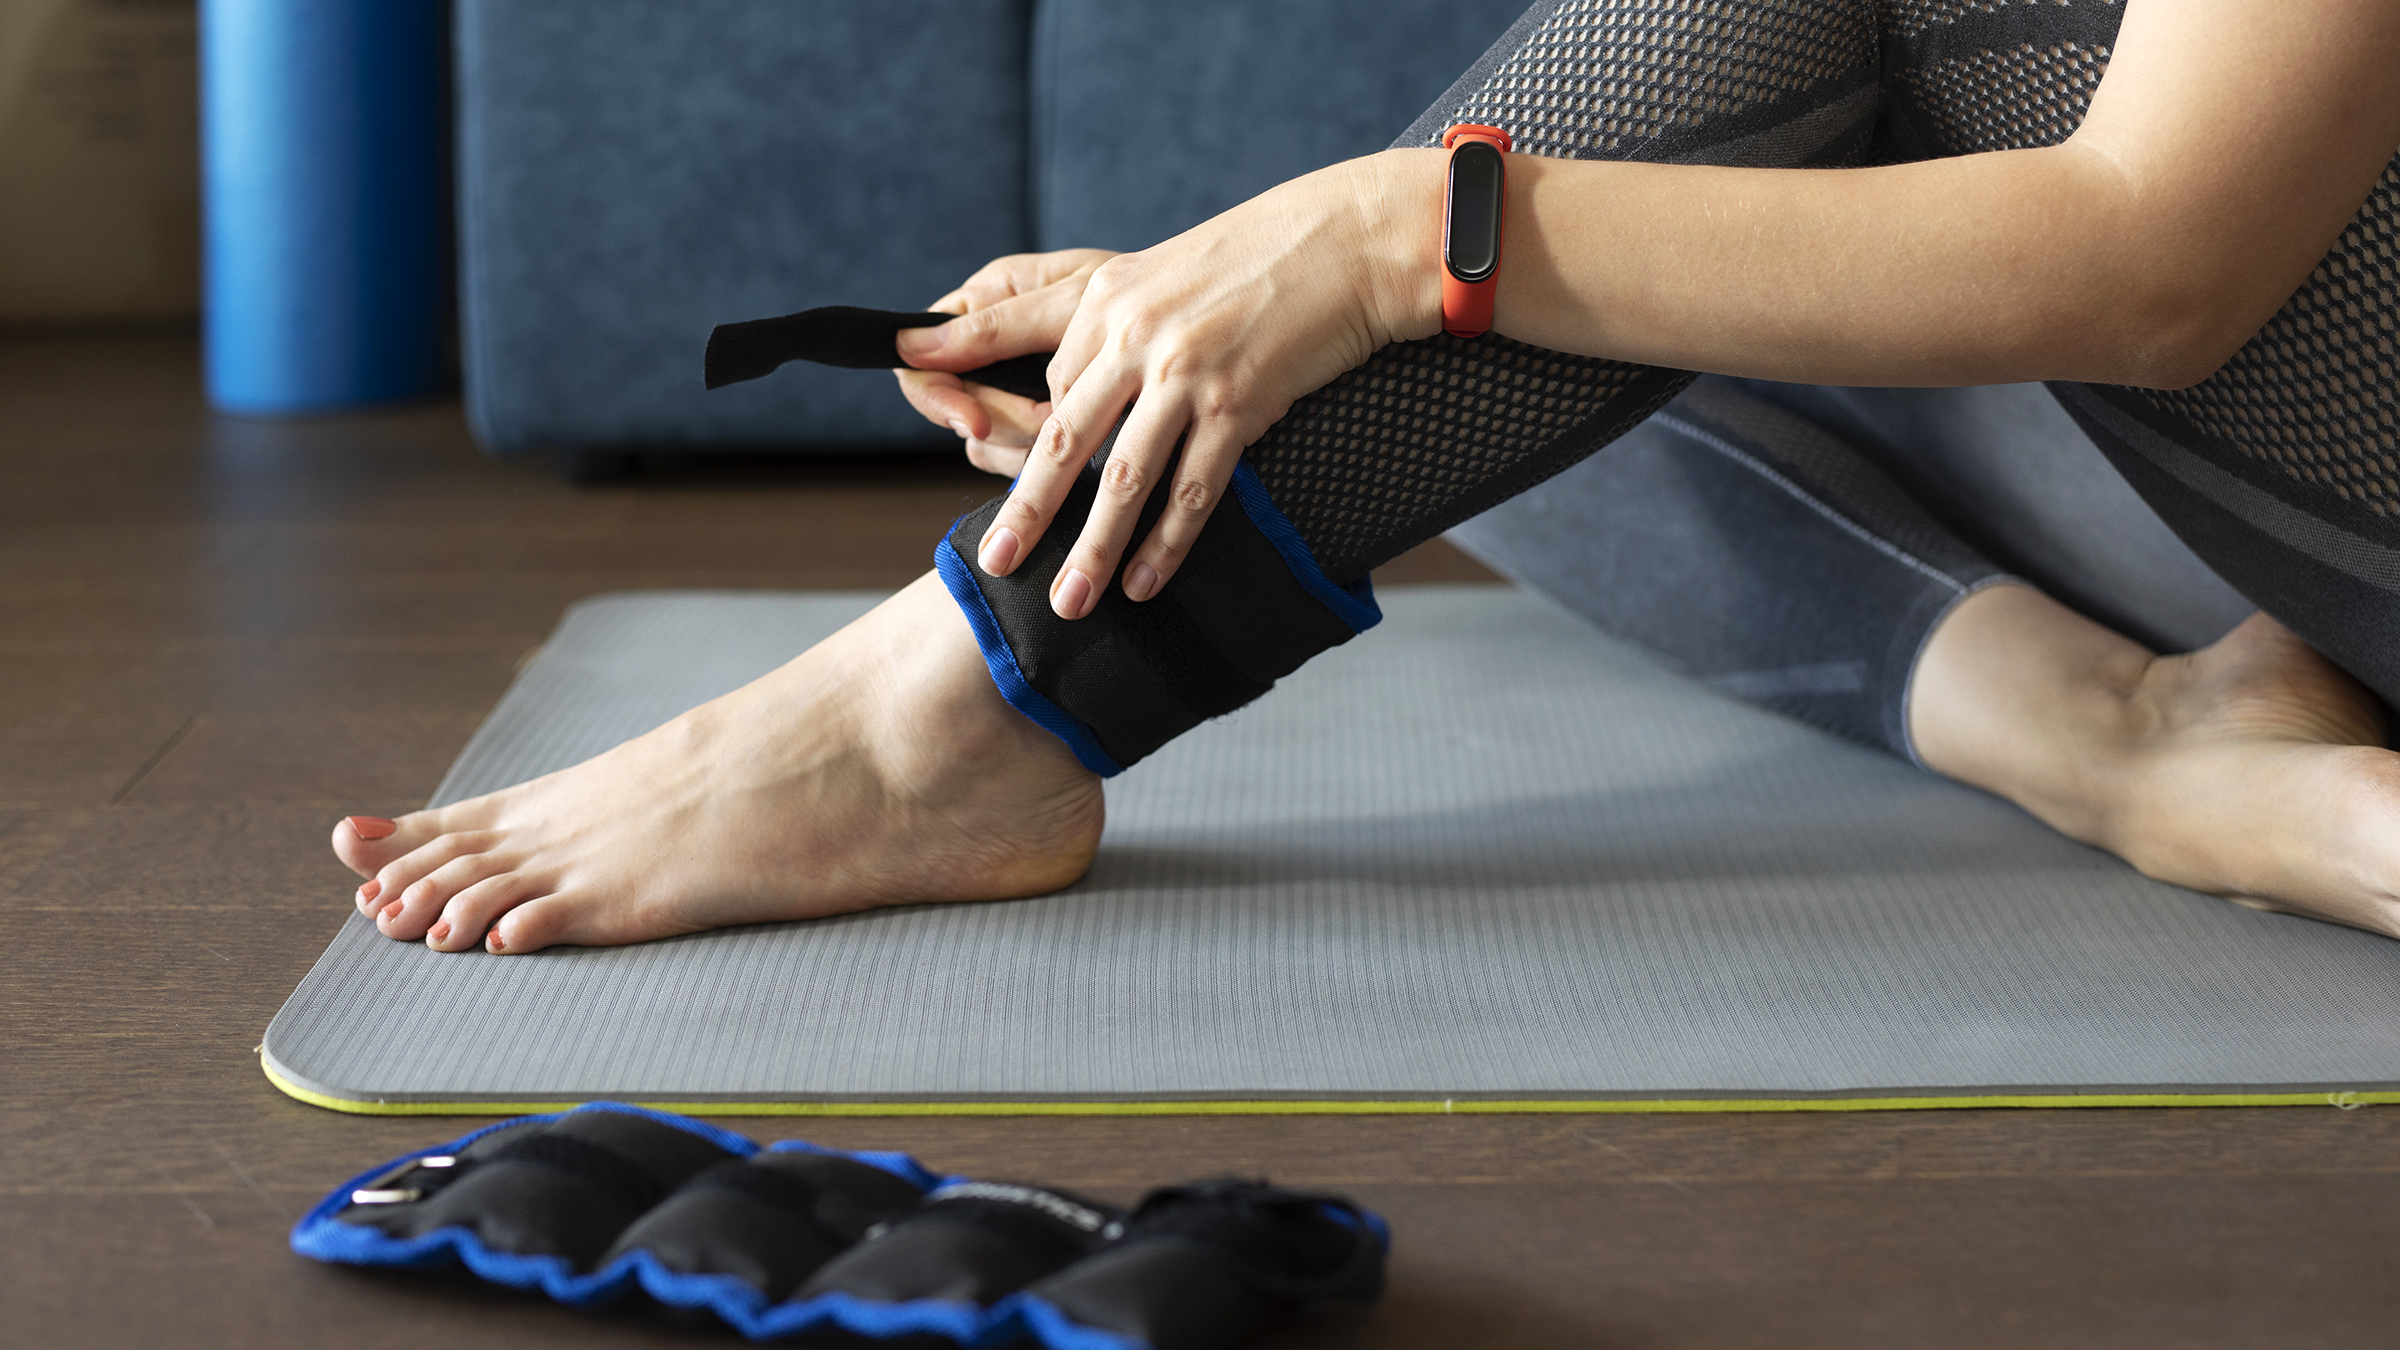 Velcro Ankle cuff exercise bands - Advanced Athletics